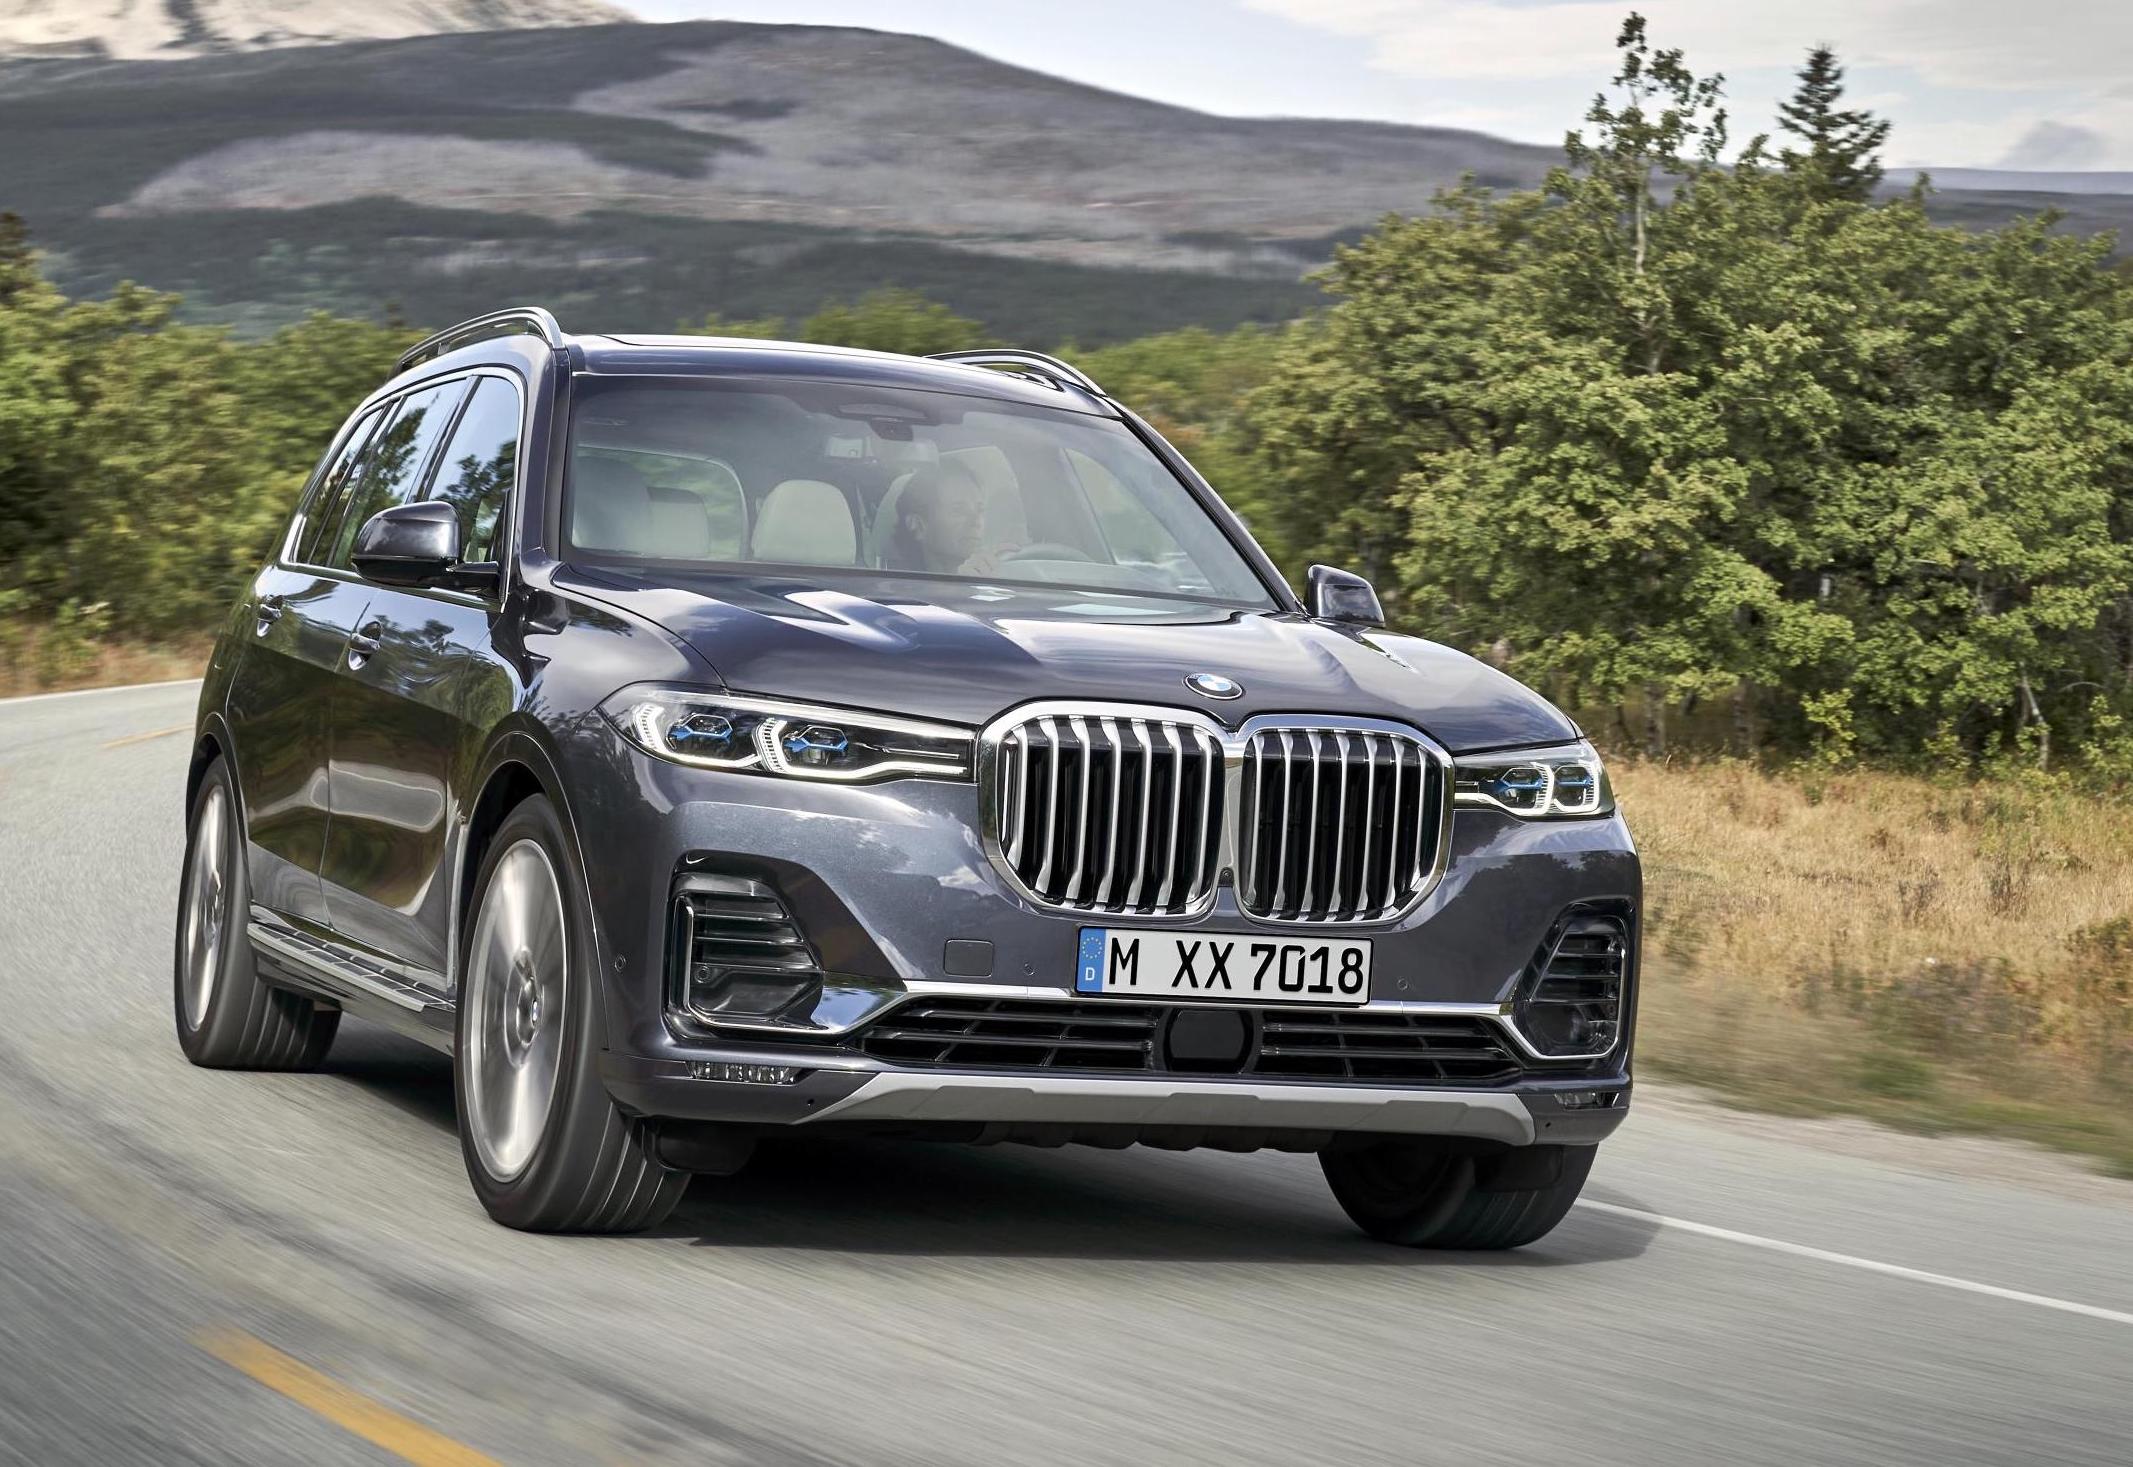 2019 BMW X7 unveiled as new flagship SUV